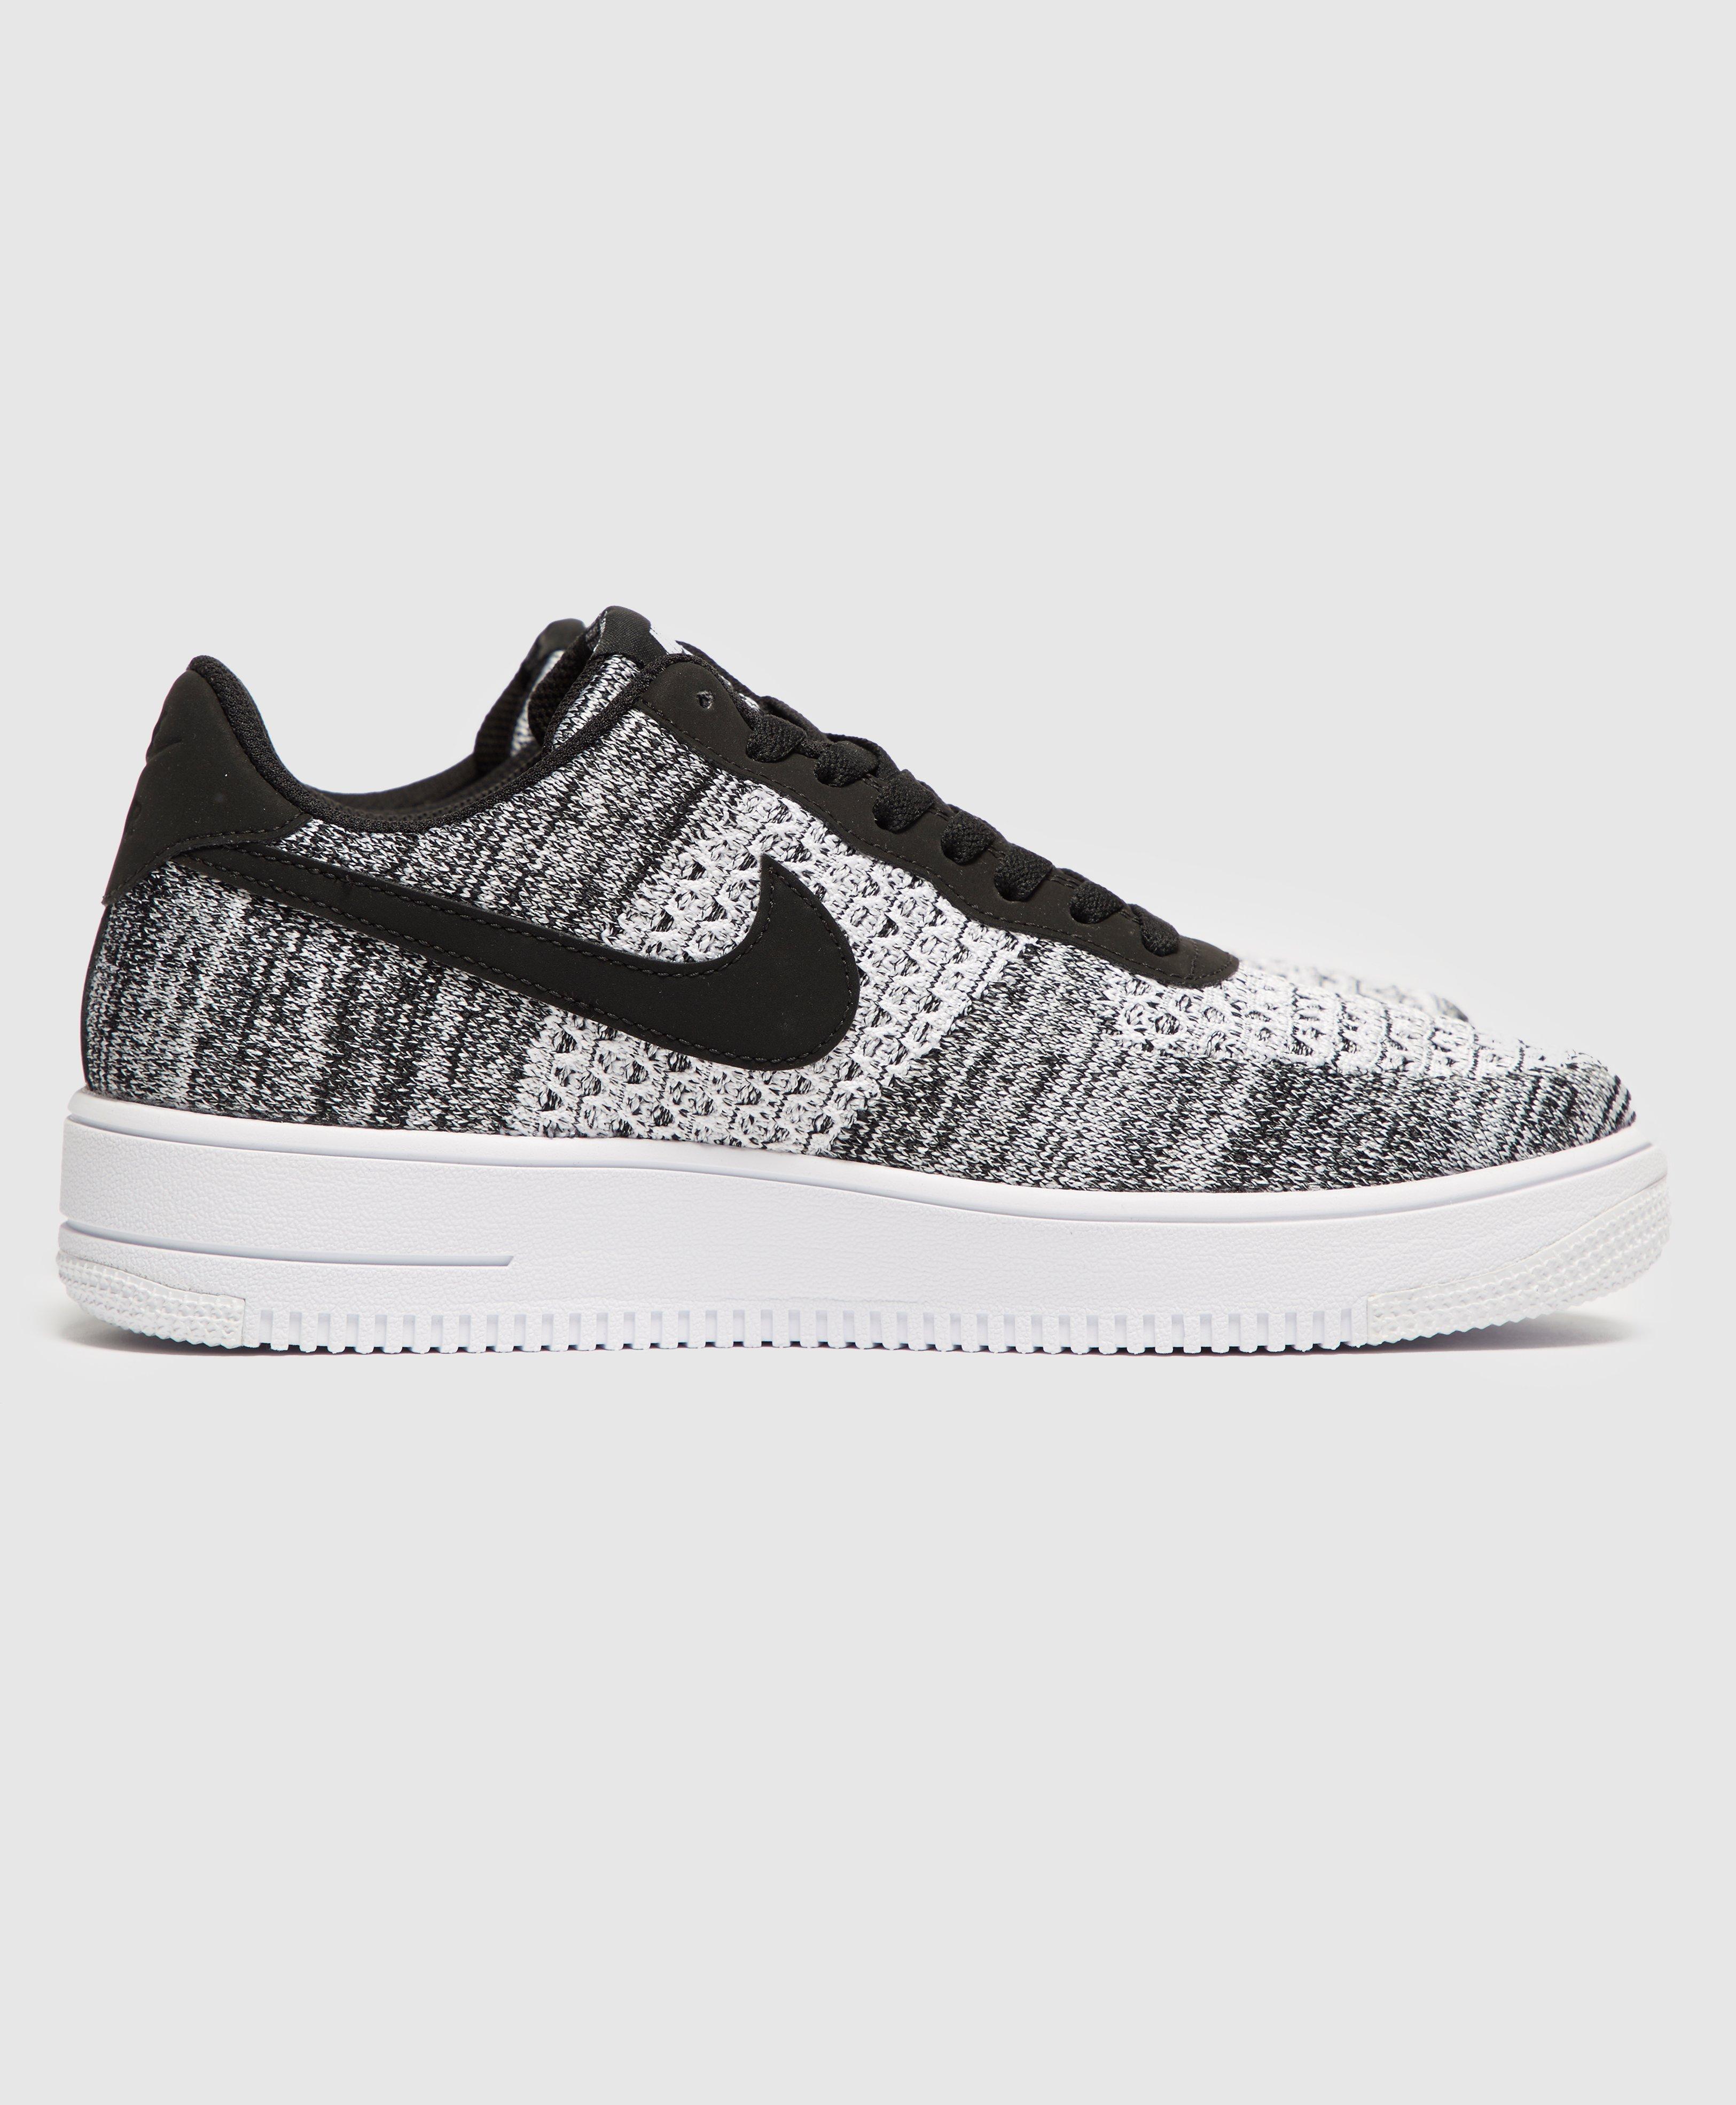 Nike Rubber Air Force 1 Flyknit 2.0 Trainers in Black for Men - Lyst